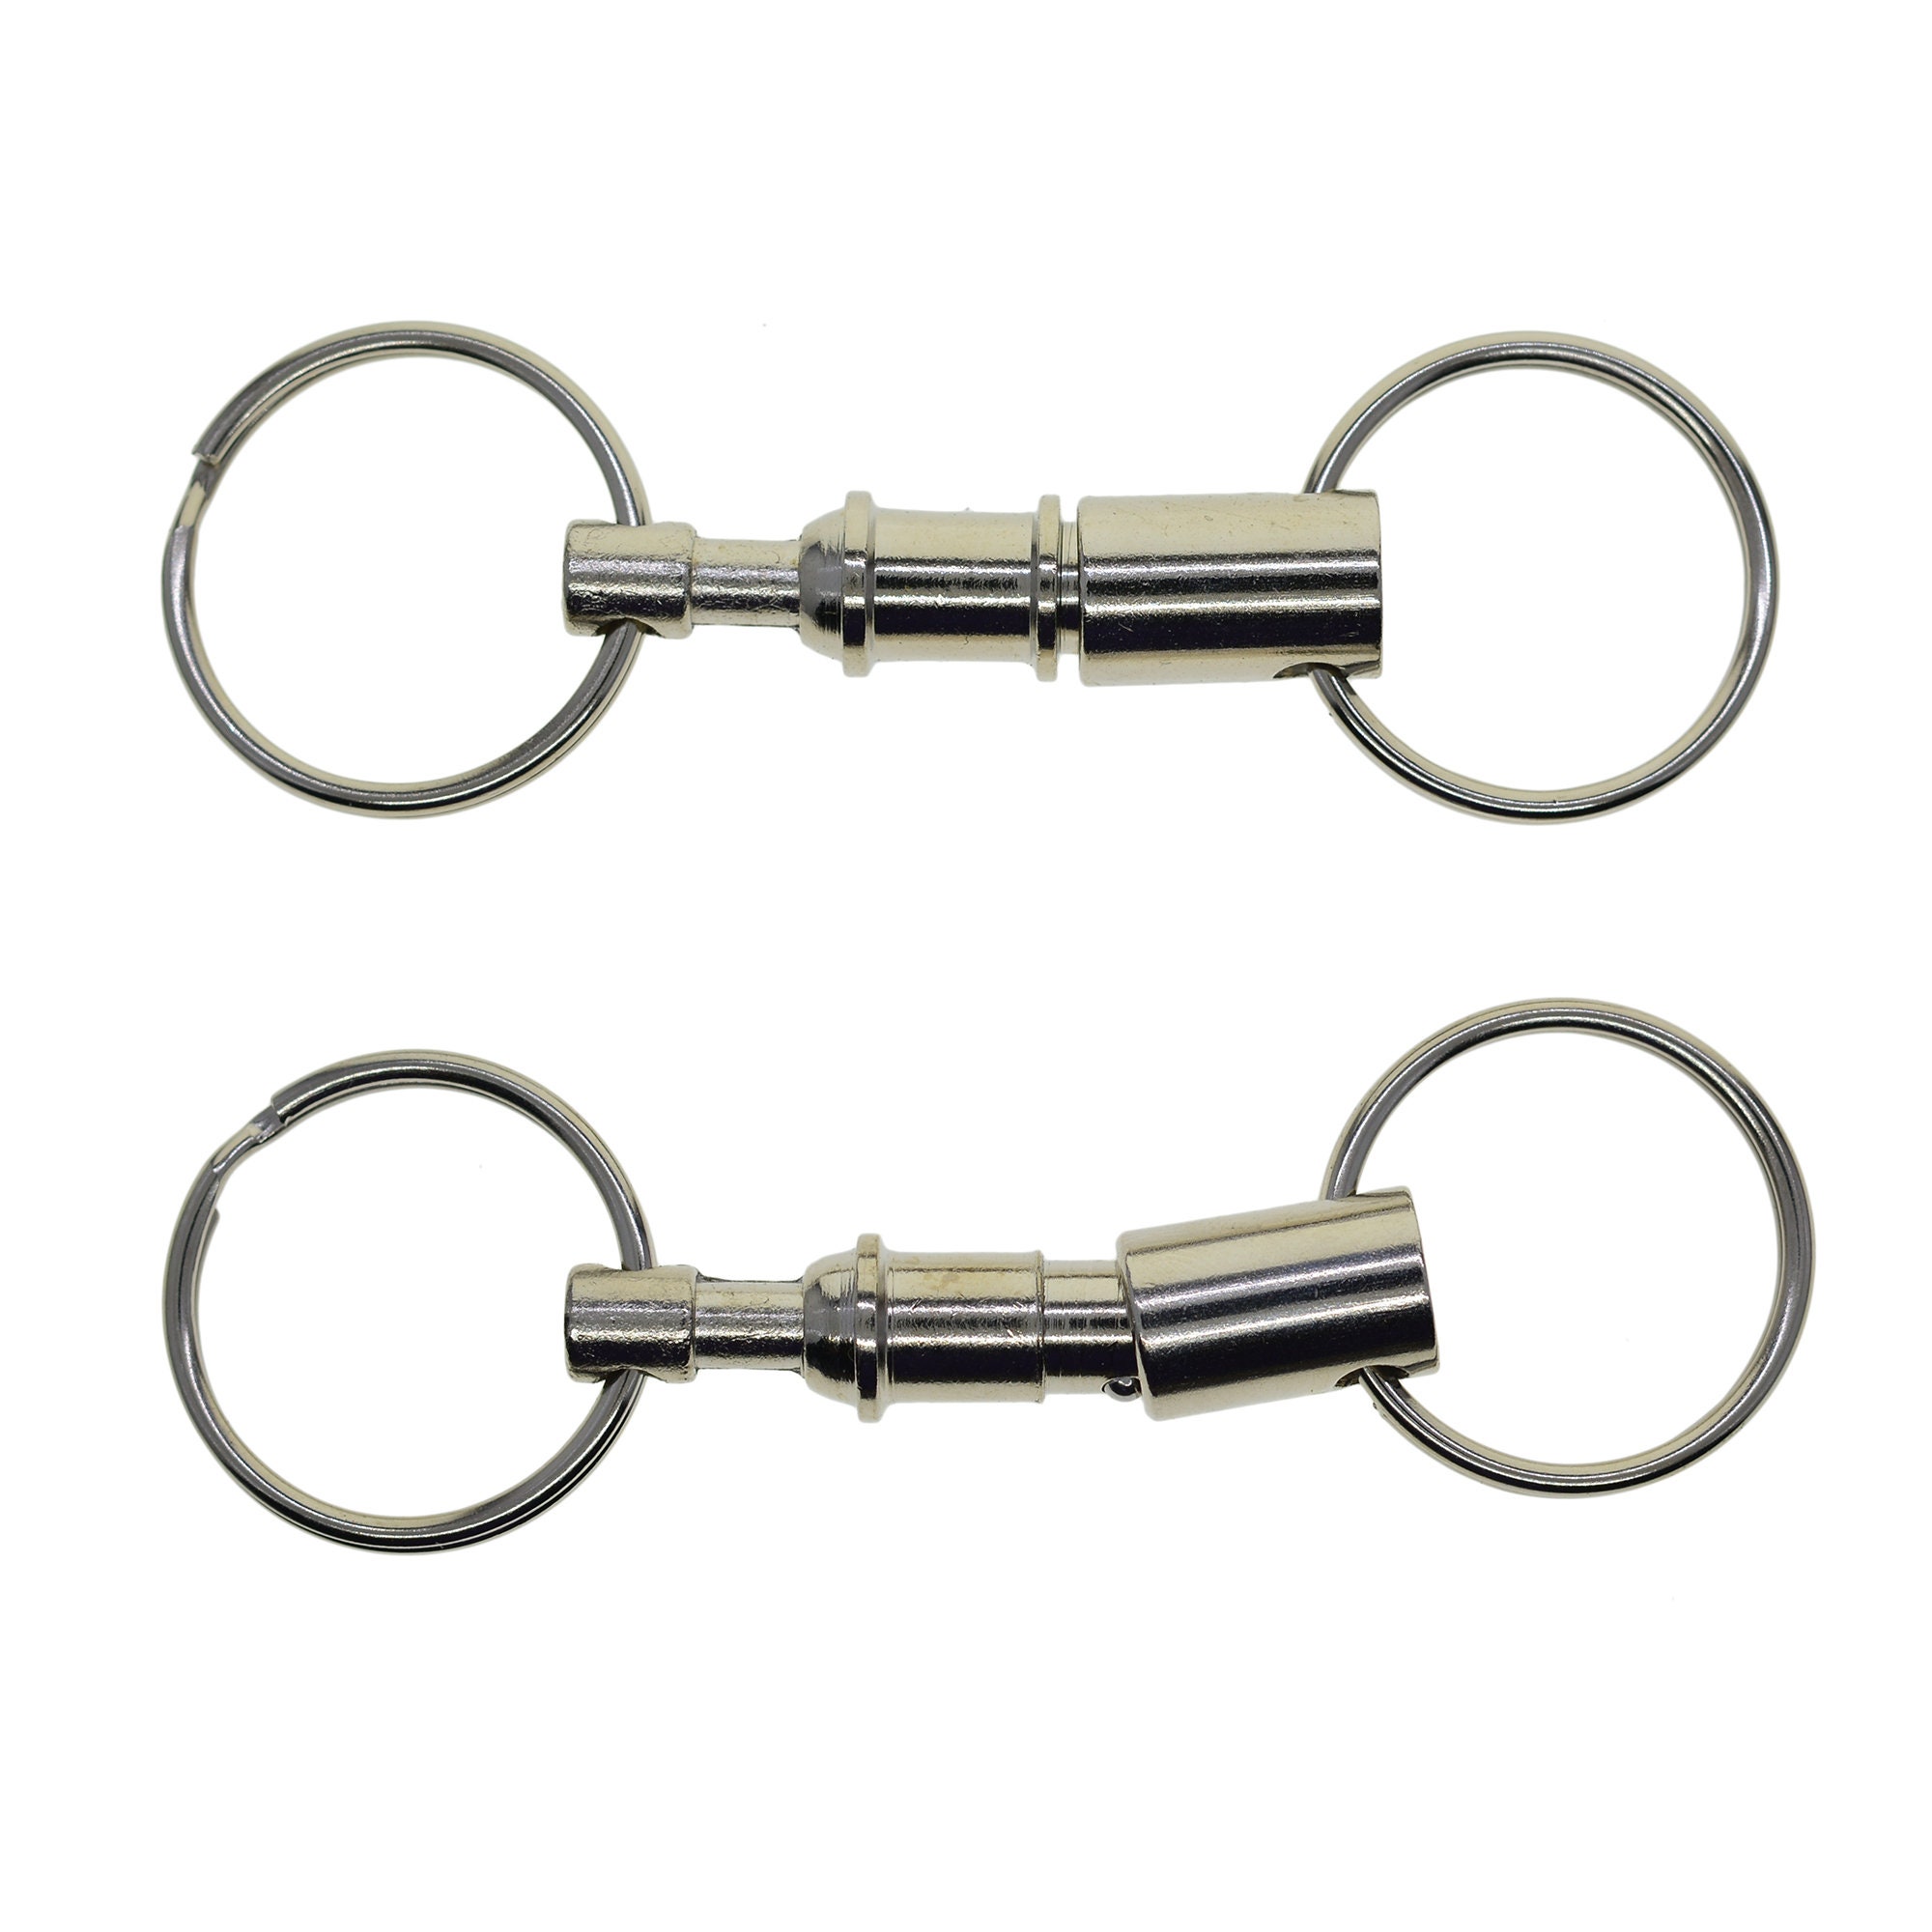 10 x Detachable Removable Keychain Pull Apart Quick Release Key Chain  Keyring